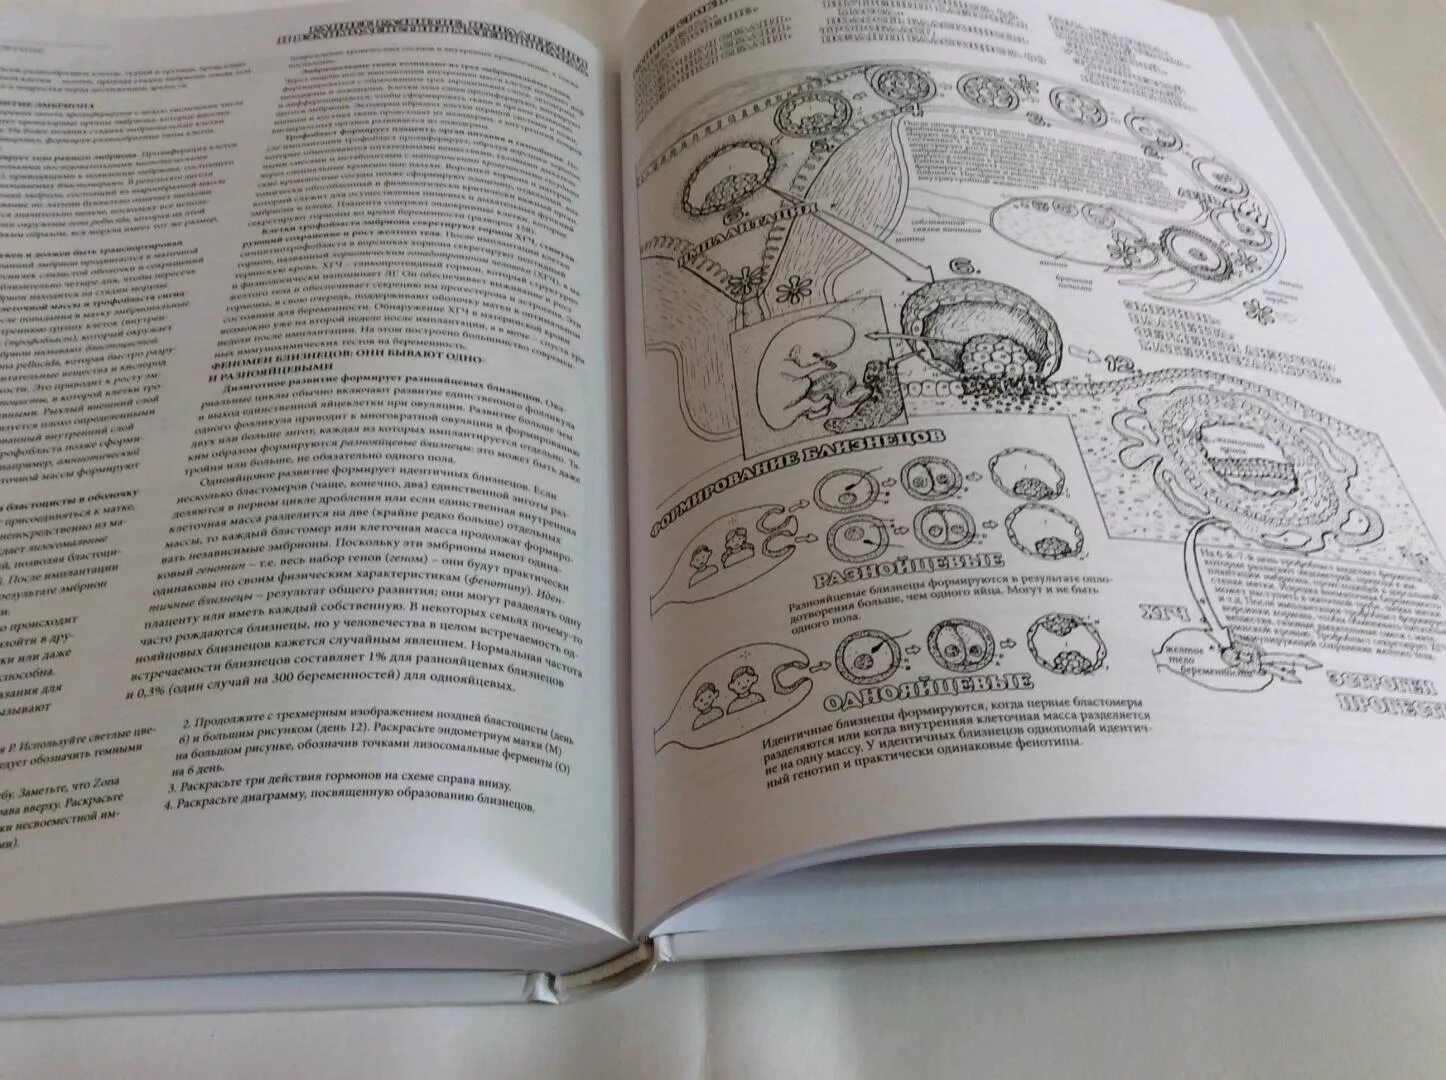 Coloring book atlas of peaceful physiology